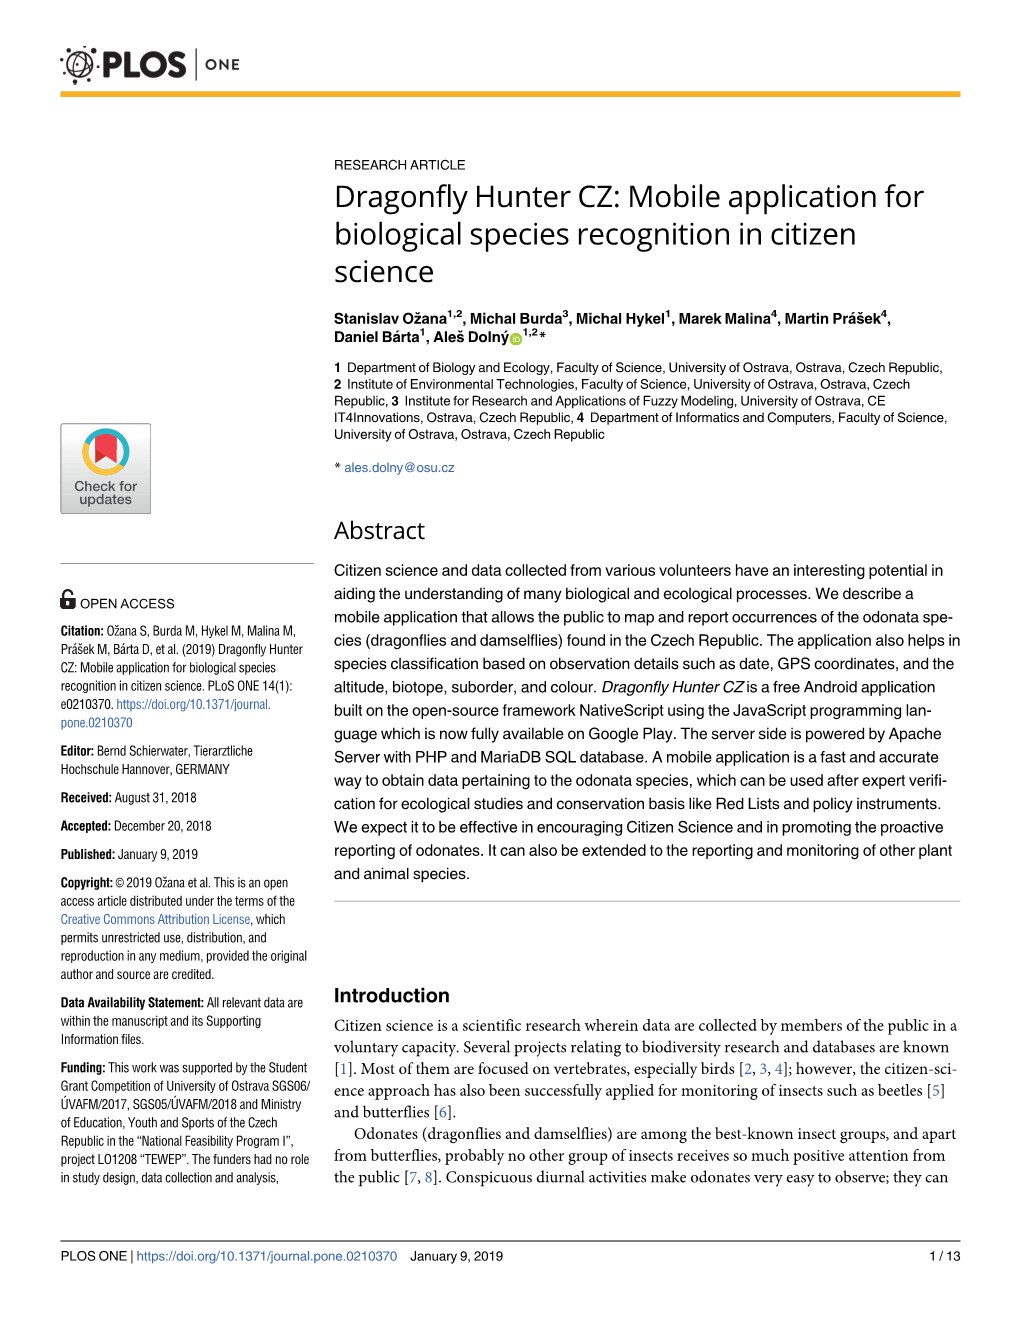 Dragonfly Hunter CZ: Mobile Application for Biological Species Recognition in Citizen Science